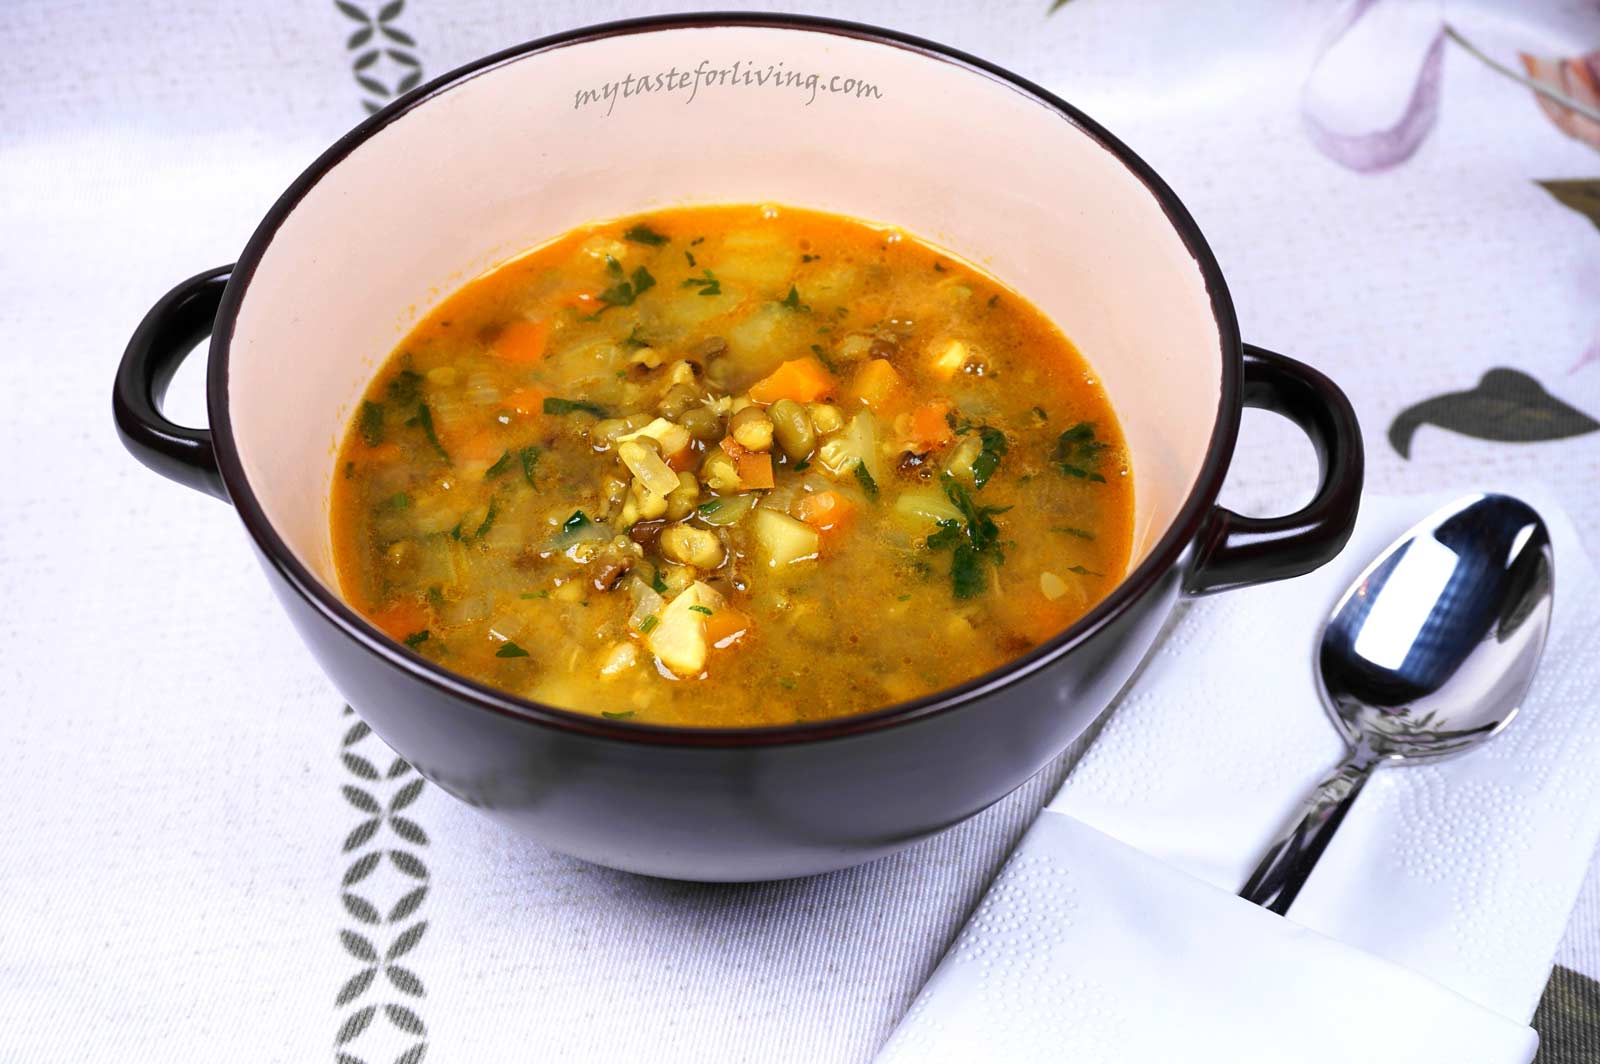 Mung bean stew prepared with creamy coconut milk and vegetables - zucchini, carrots, onions and garlic. This vegan healthy stew is easy to prepare and is full of vitamins and proteins.